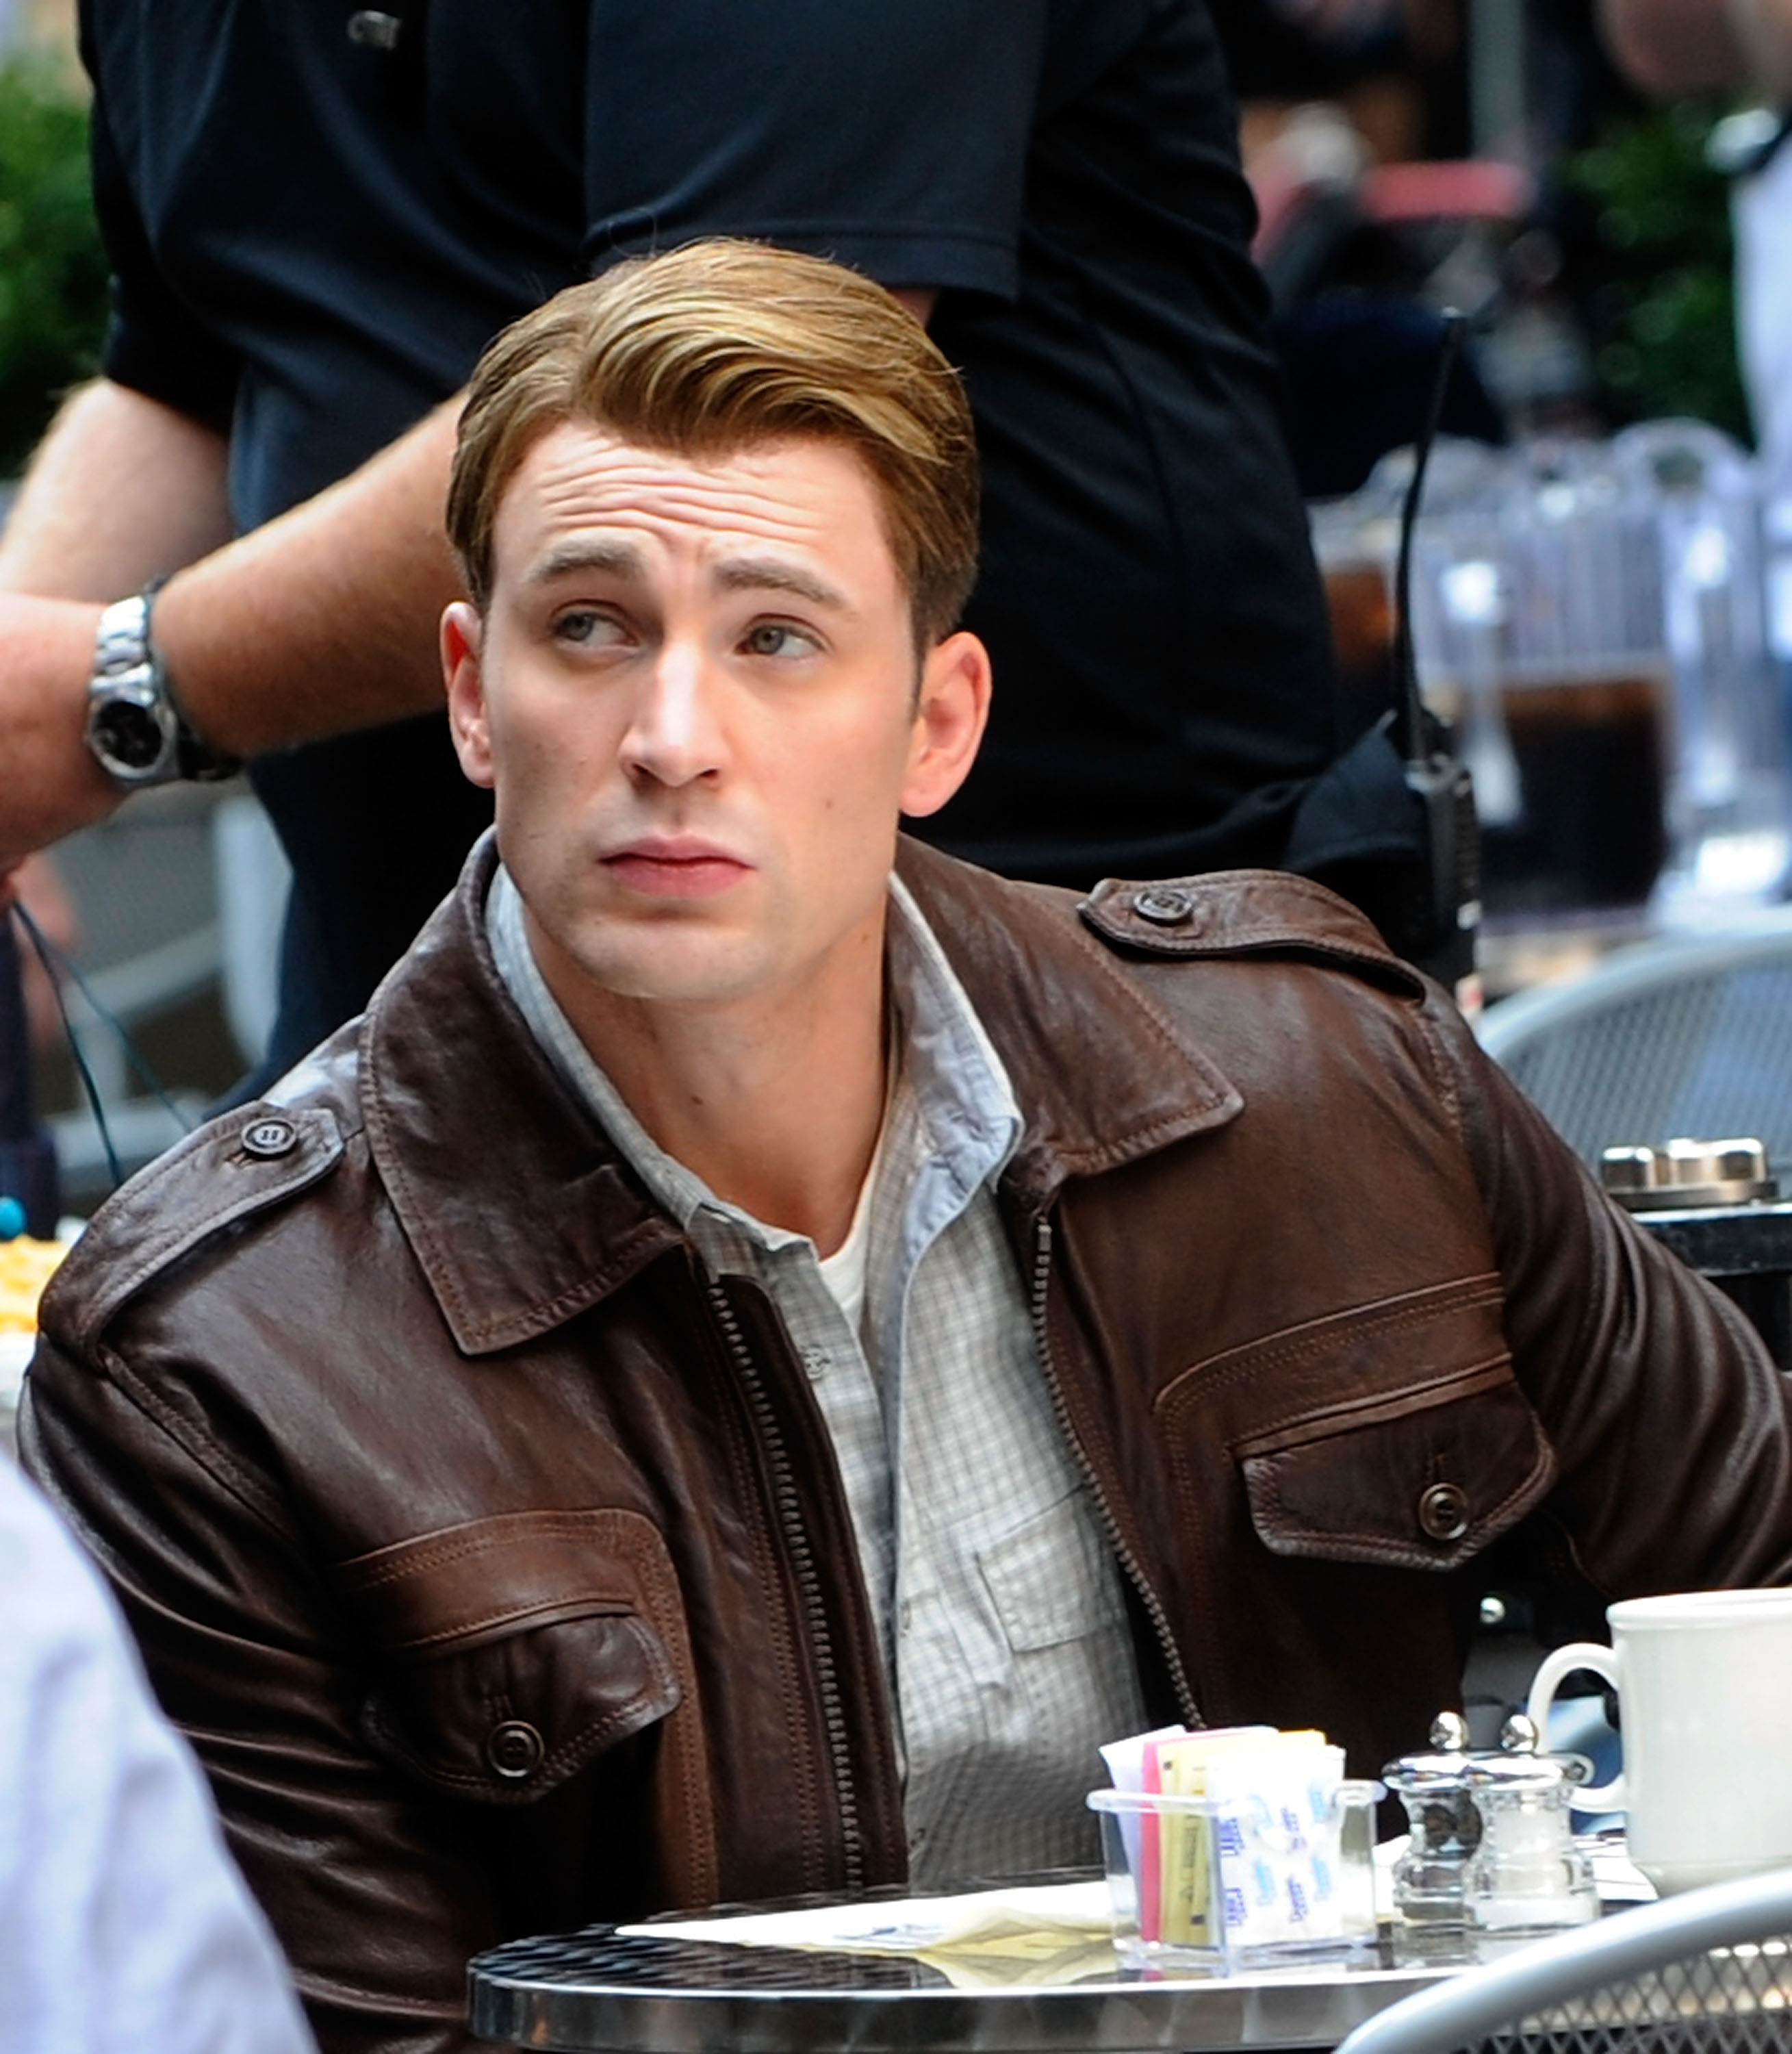 Chris Evans filming on location for "Avengers" on September 3, 2011 in Manhattan, New York City | Source: Getty Images